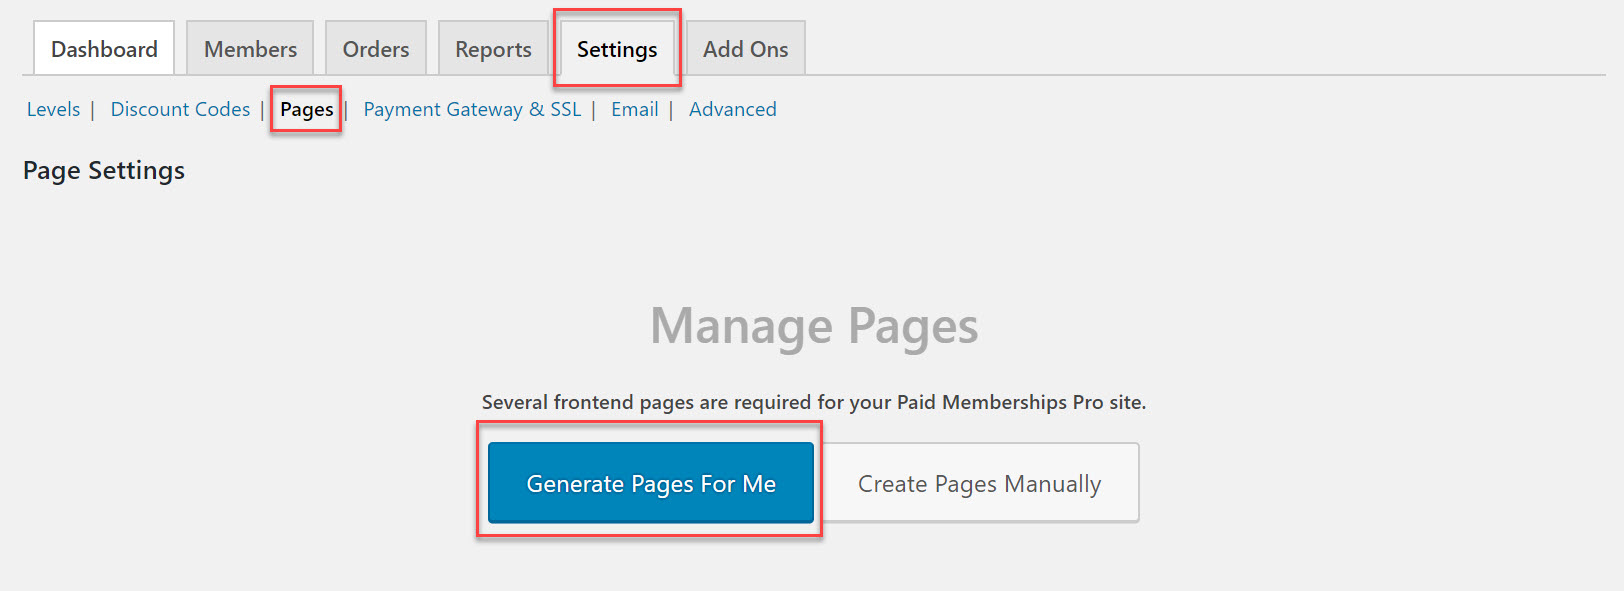 Generate Pages